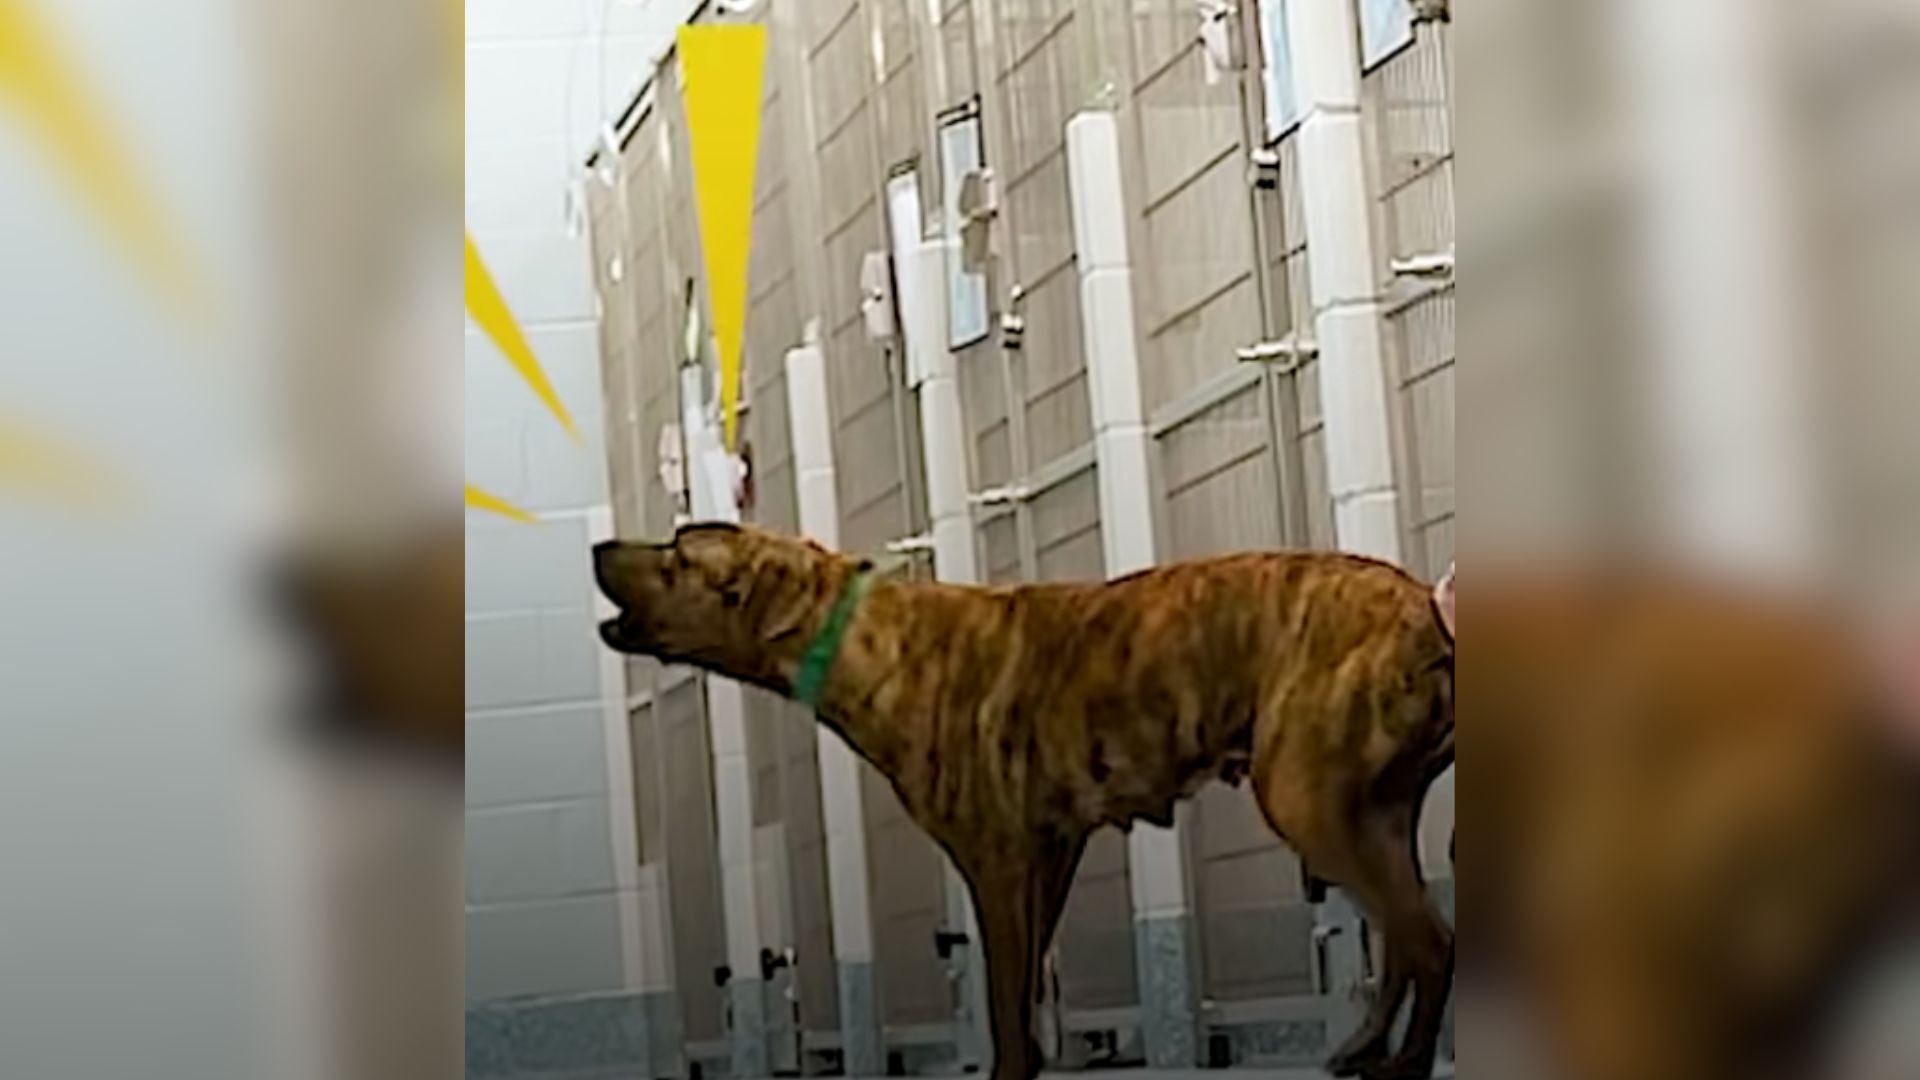 Dog Was Almost Euthanized For Being ‘Aggressive’ But Then A Miracle Happened At The Last Moment